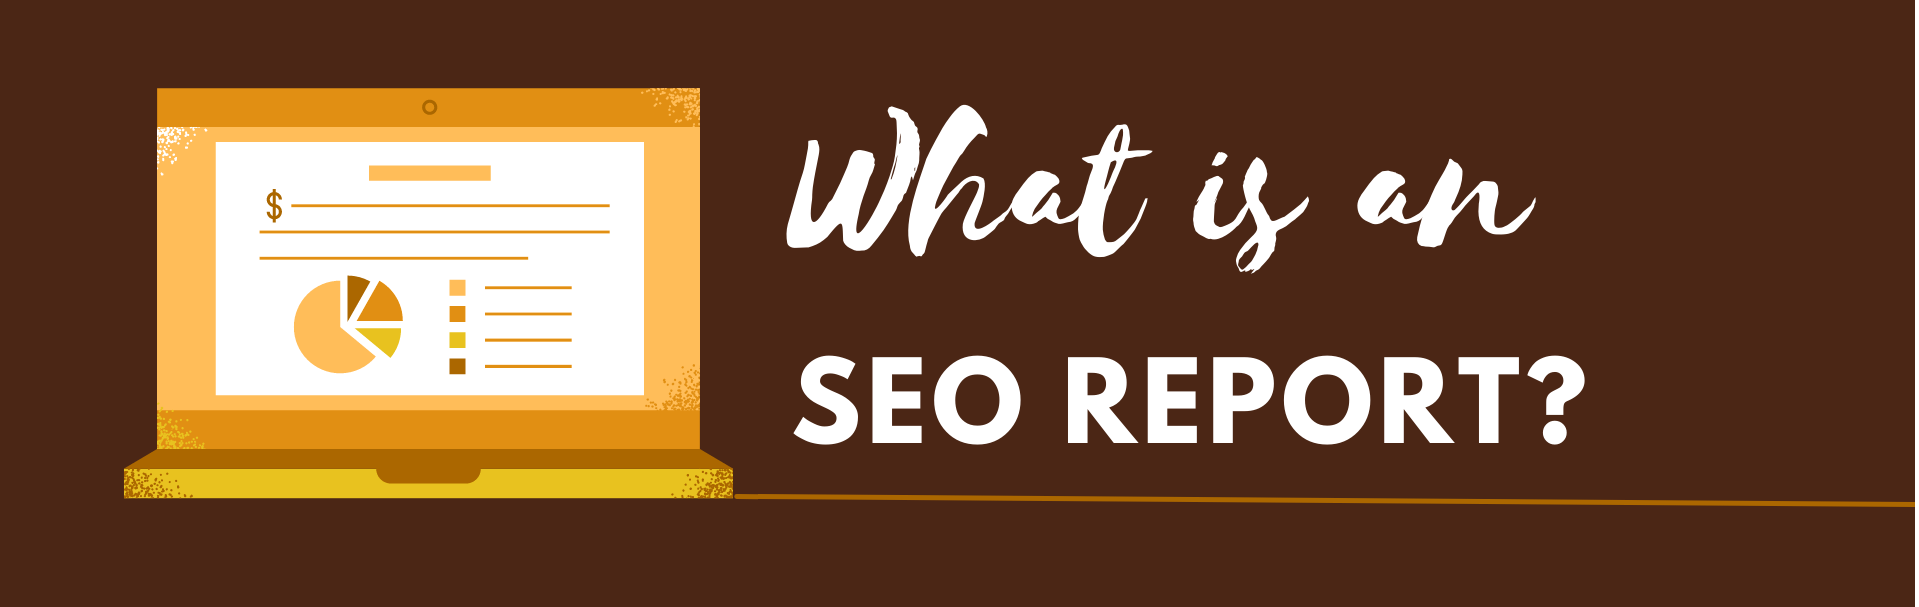 What Is An SEO Report